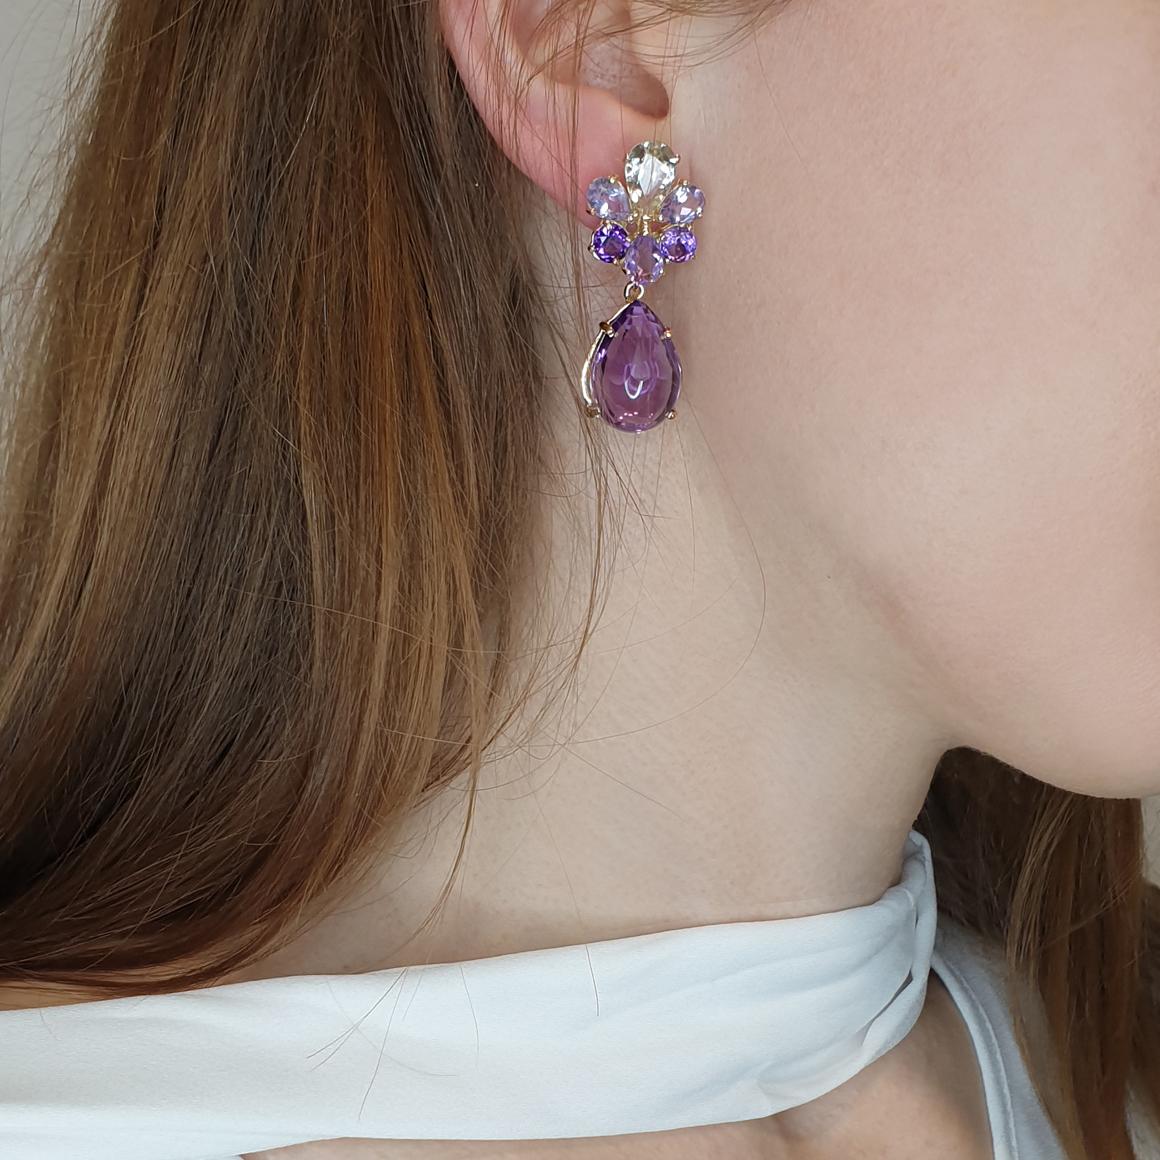 Amethyst symbolizes the purity of the soul and humility, with its intense purple color protects against negative thoughts and keeps depression away. Made in Italy by Stanoppi Jewellery since 1948.
Earrings in 18k rose gold with Amethyst (drop